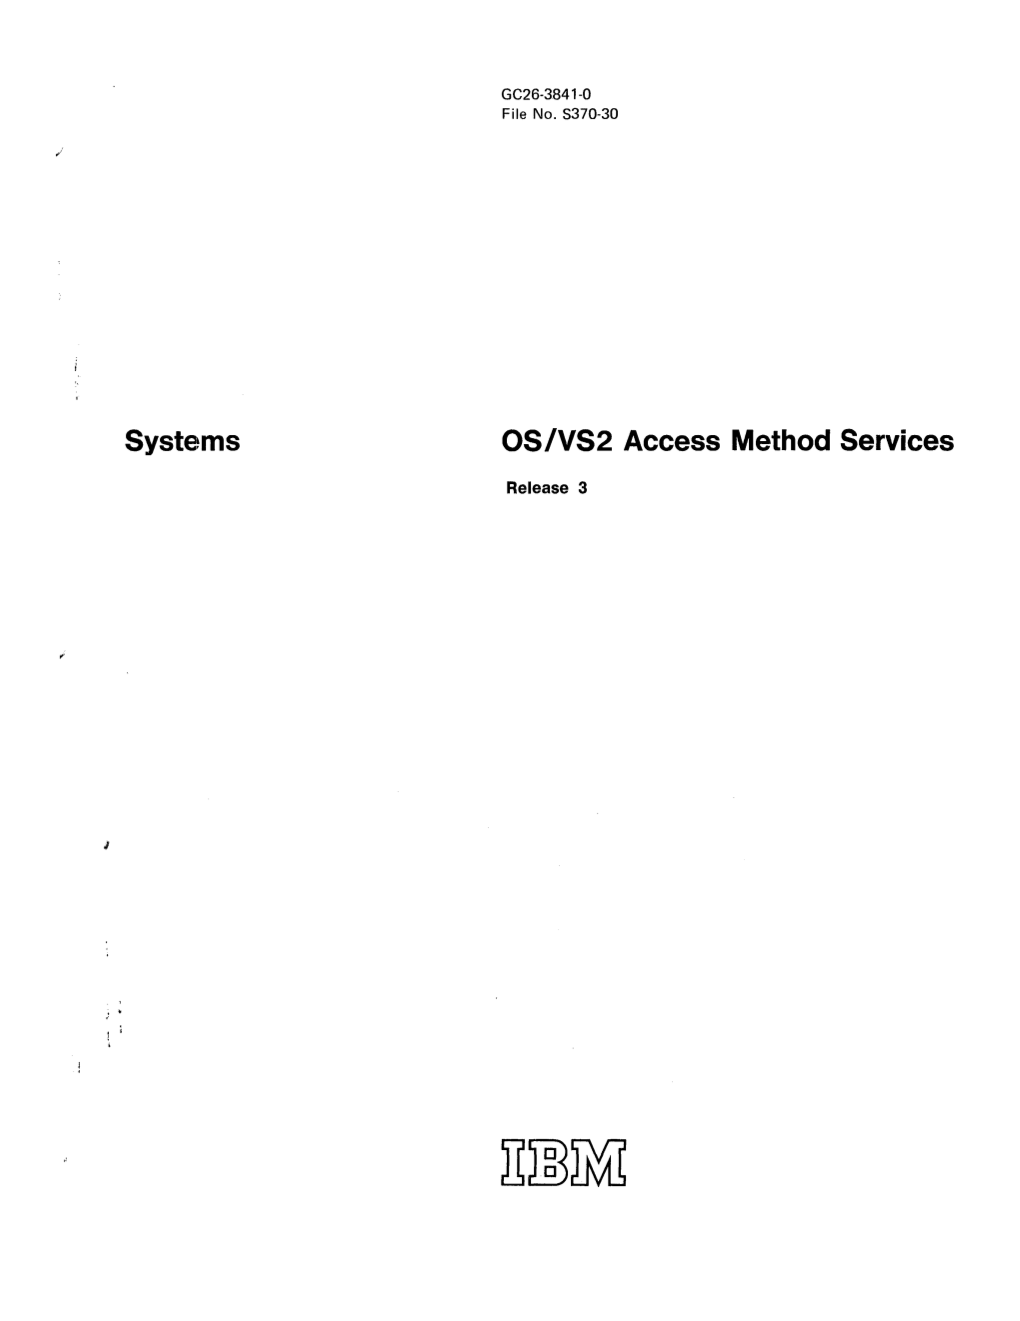 Systems OS/VS2 Access Method Services